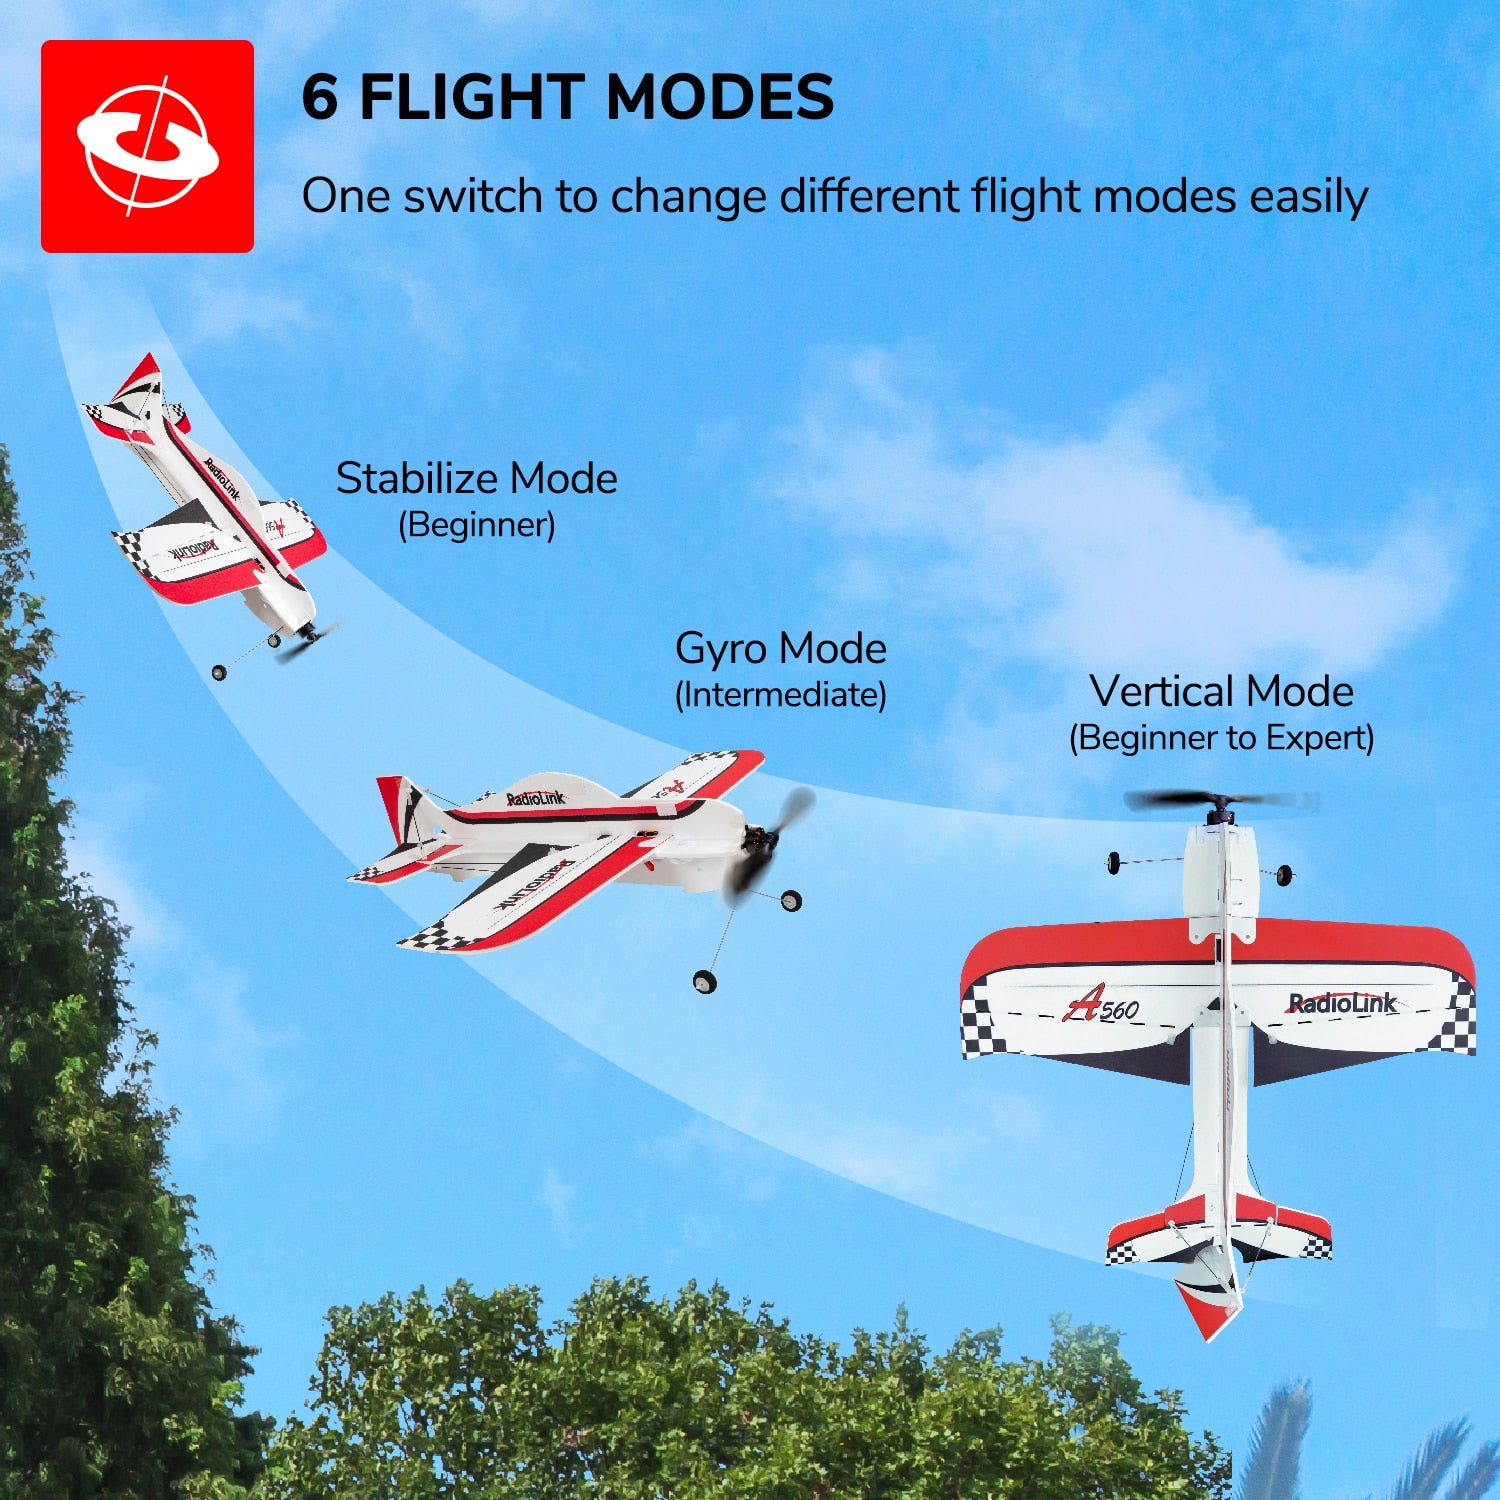 6 FLIGHT MODES One switch to change different flight modes easily Stabilize Mode (Be